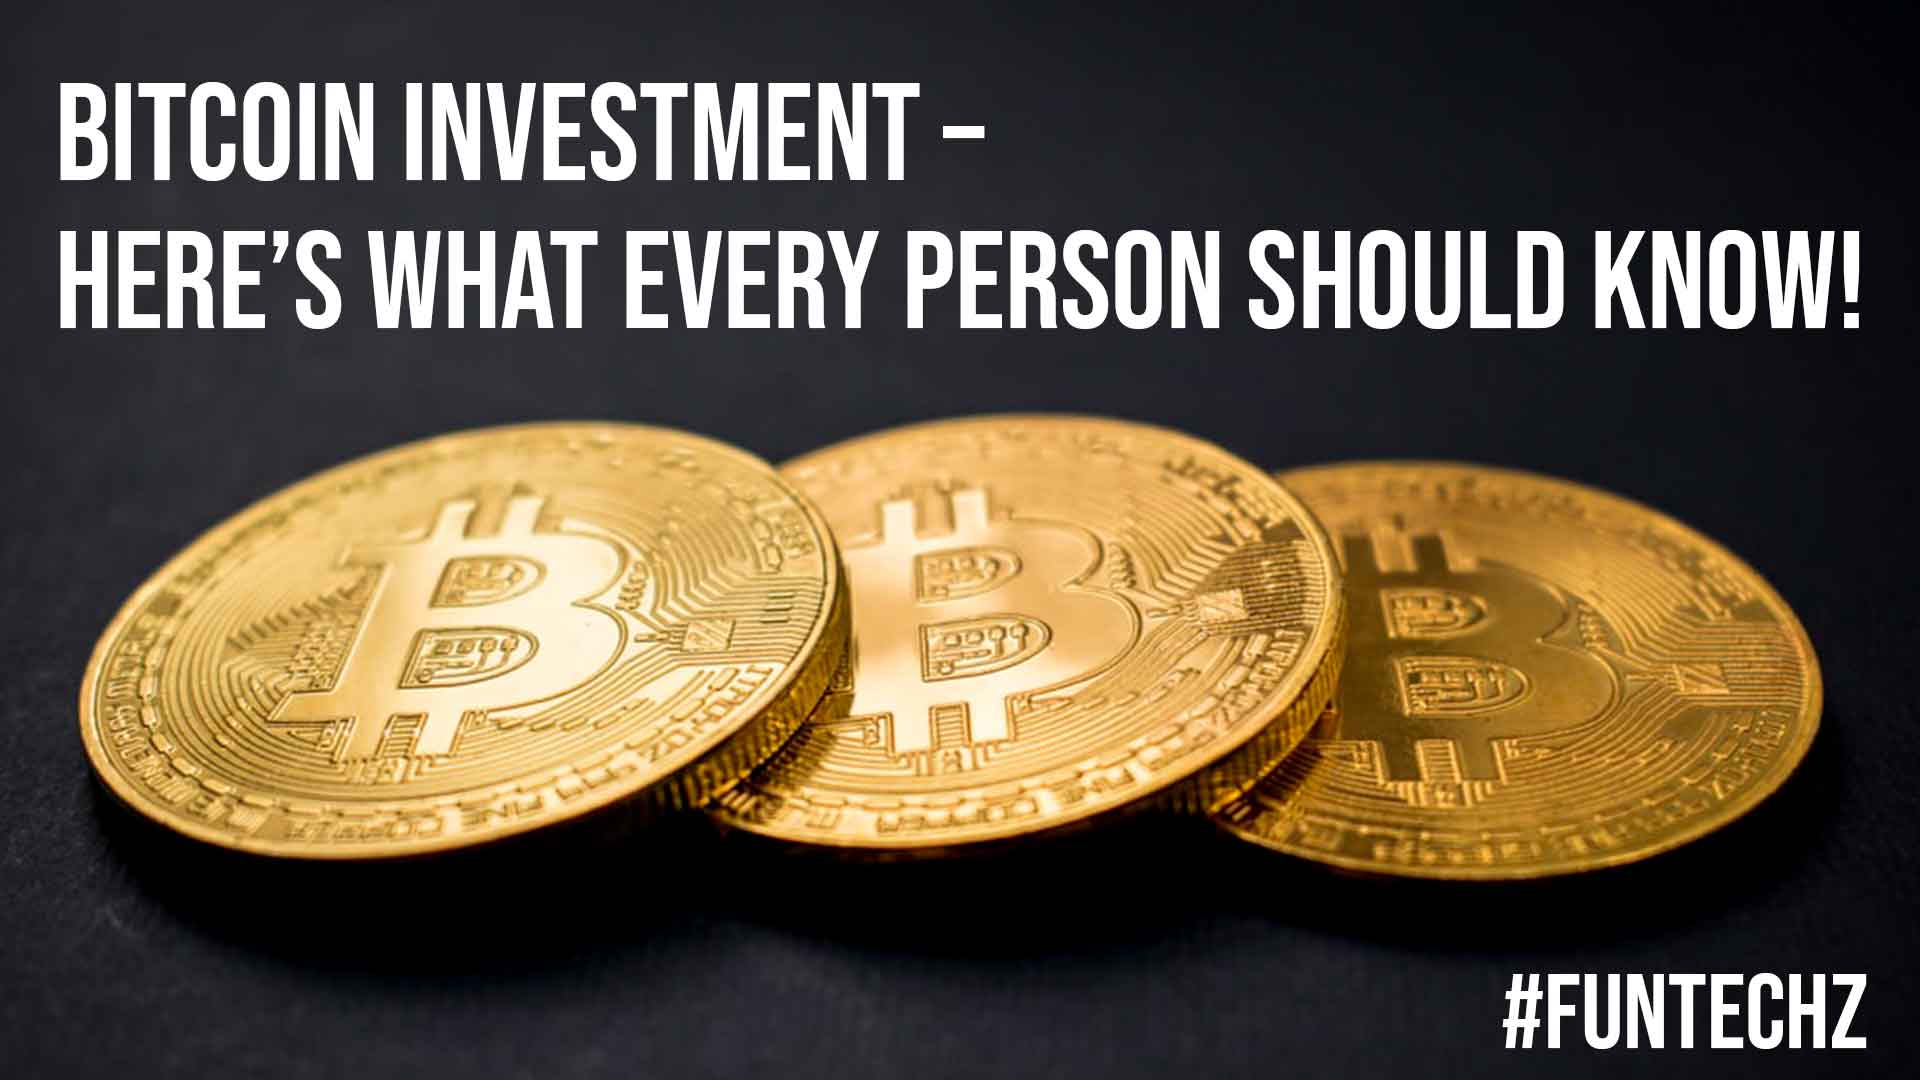 Bitcoin Investment Here is What Every Person Should Know